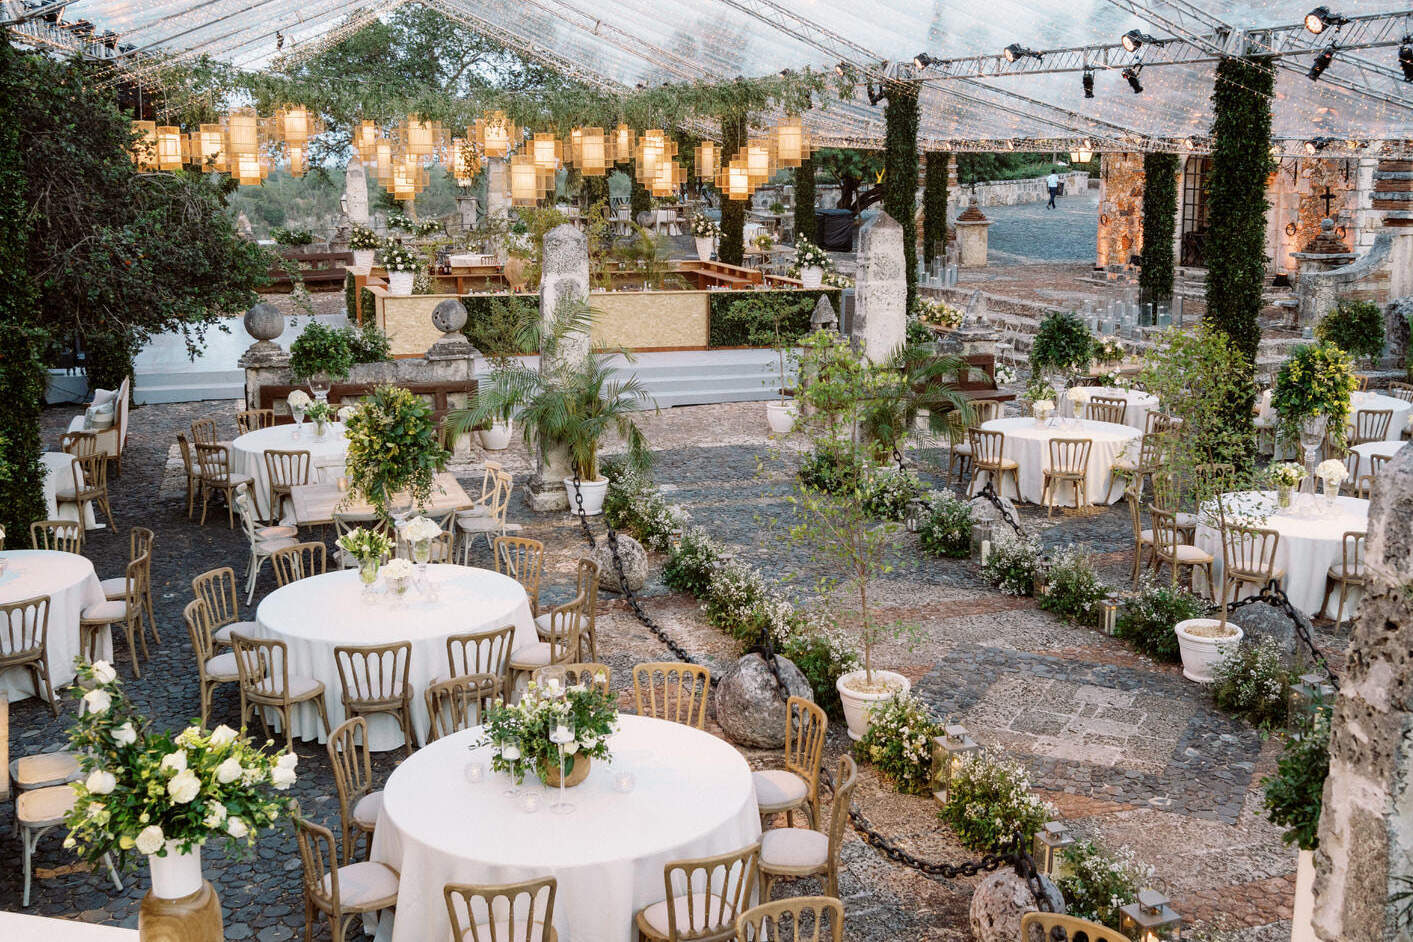 A destination wedding reception is all aglow at dusk, with lighting overhead and candles on the tables.